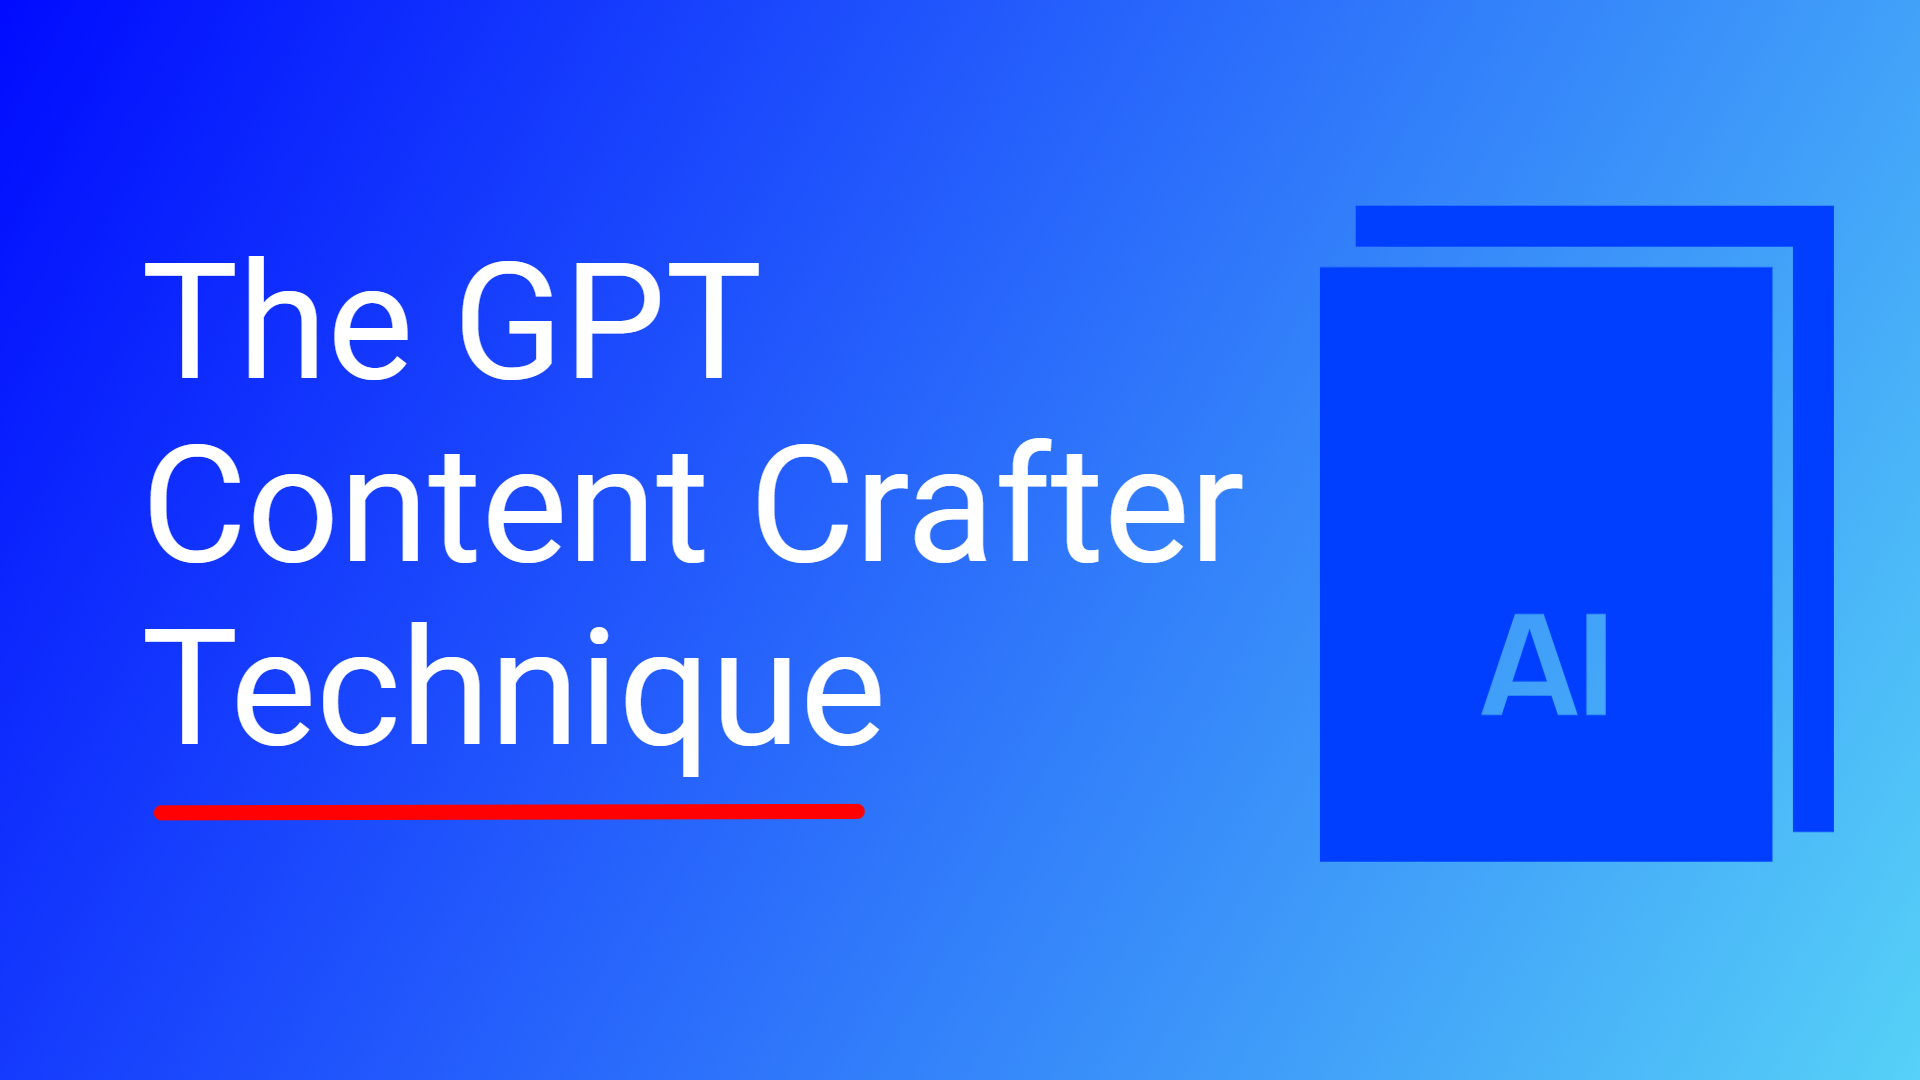 GPT Content Crafter